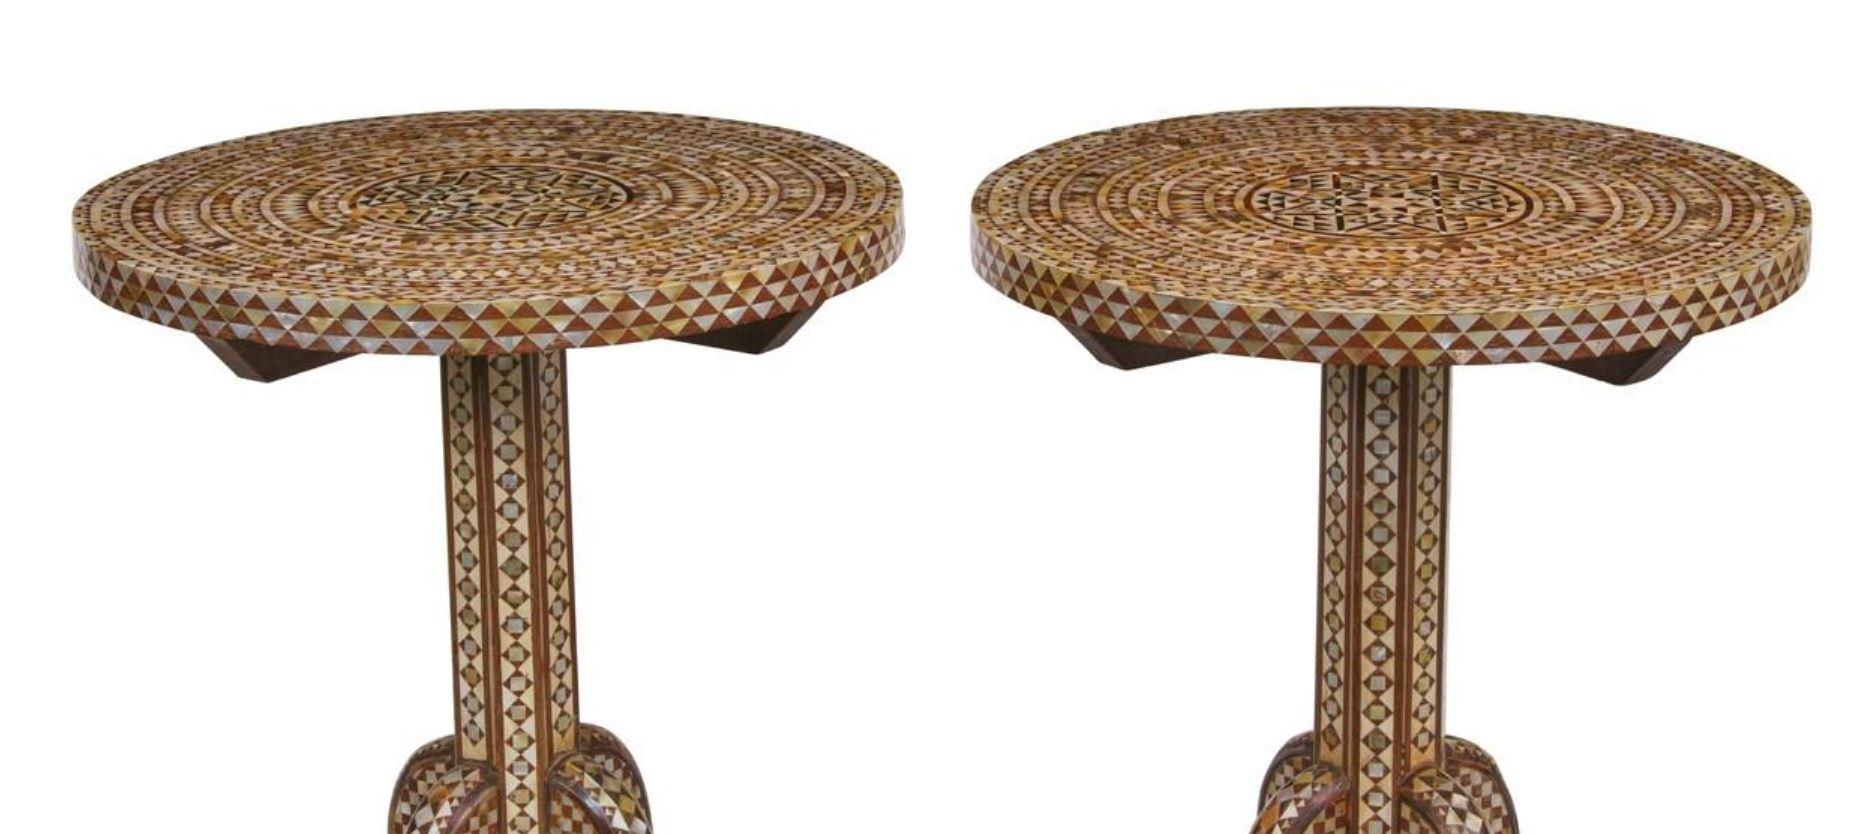 Pair Levantine Inlaid Occasional Round Tables, Early 20th Century For Sale 1